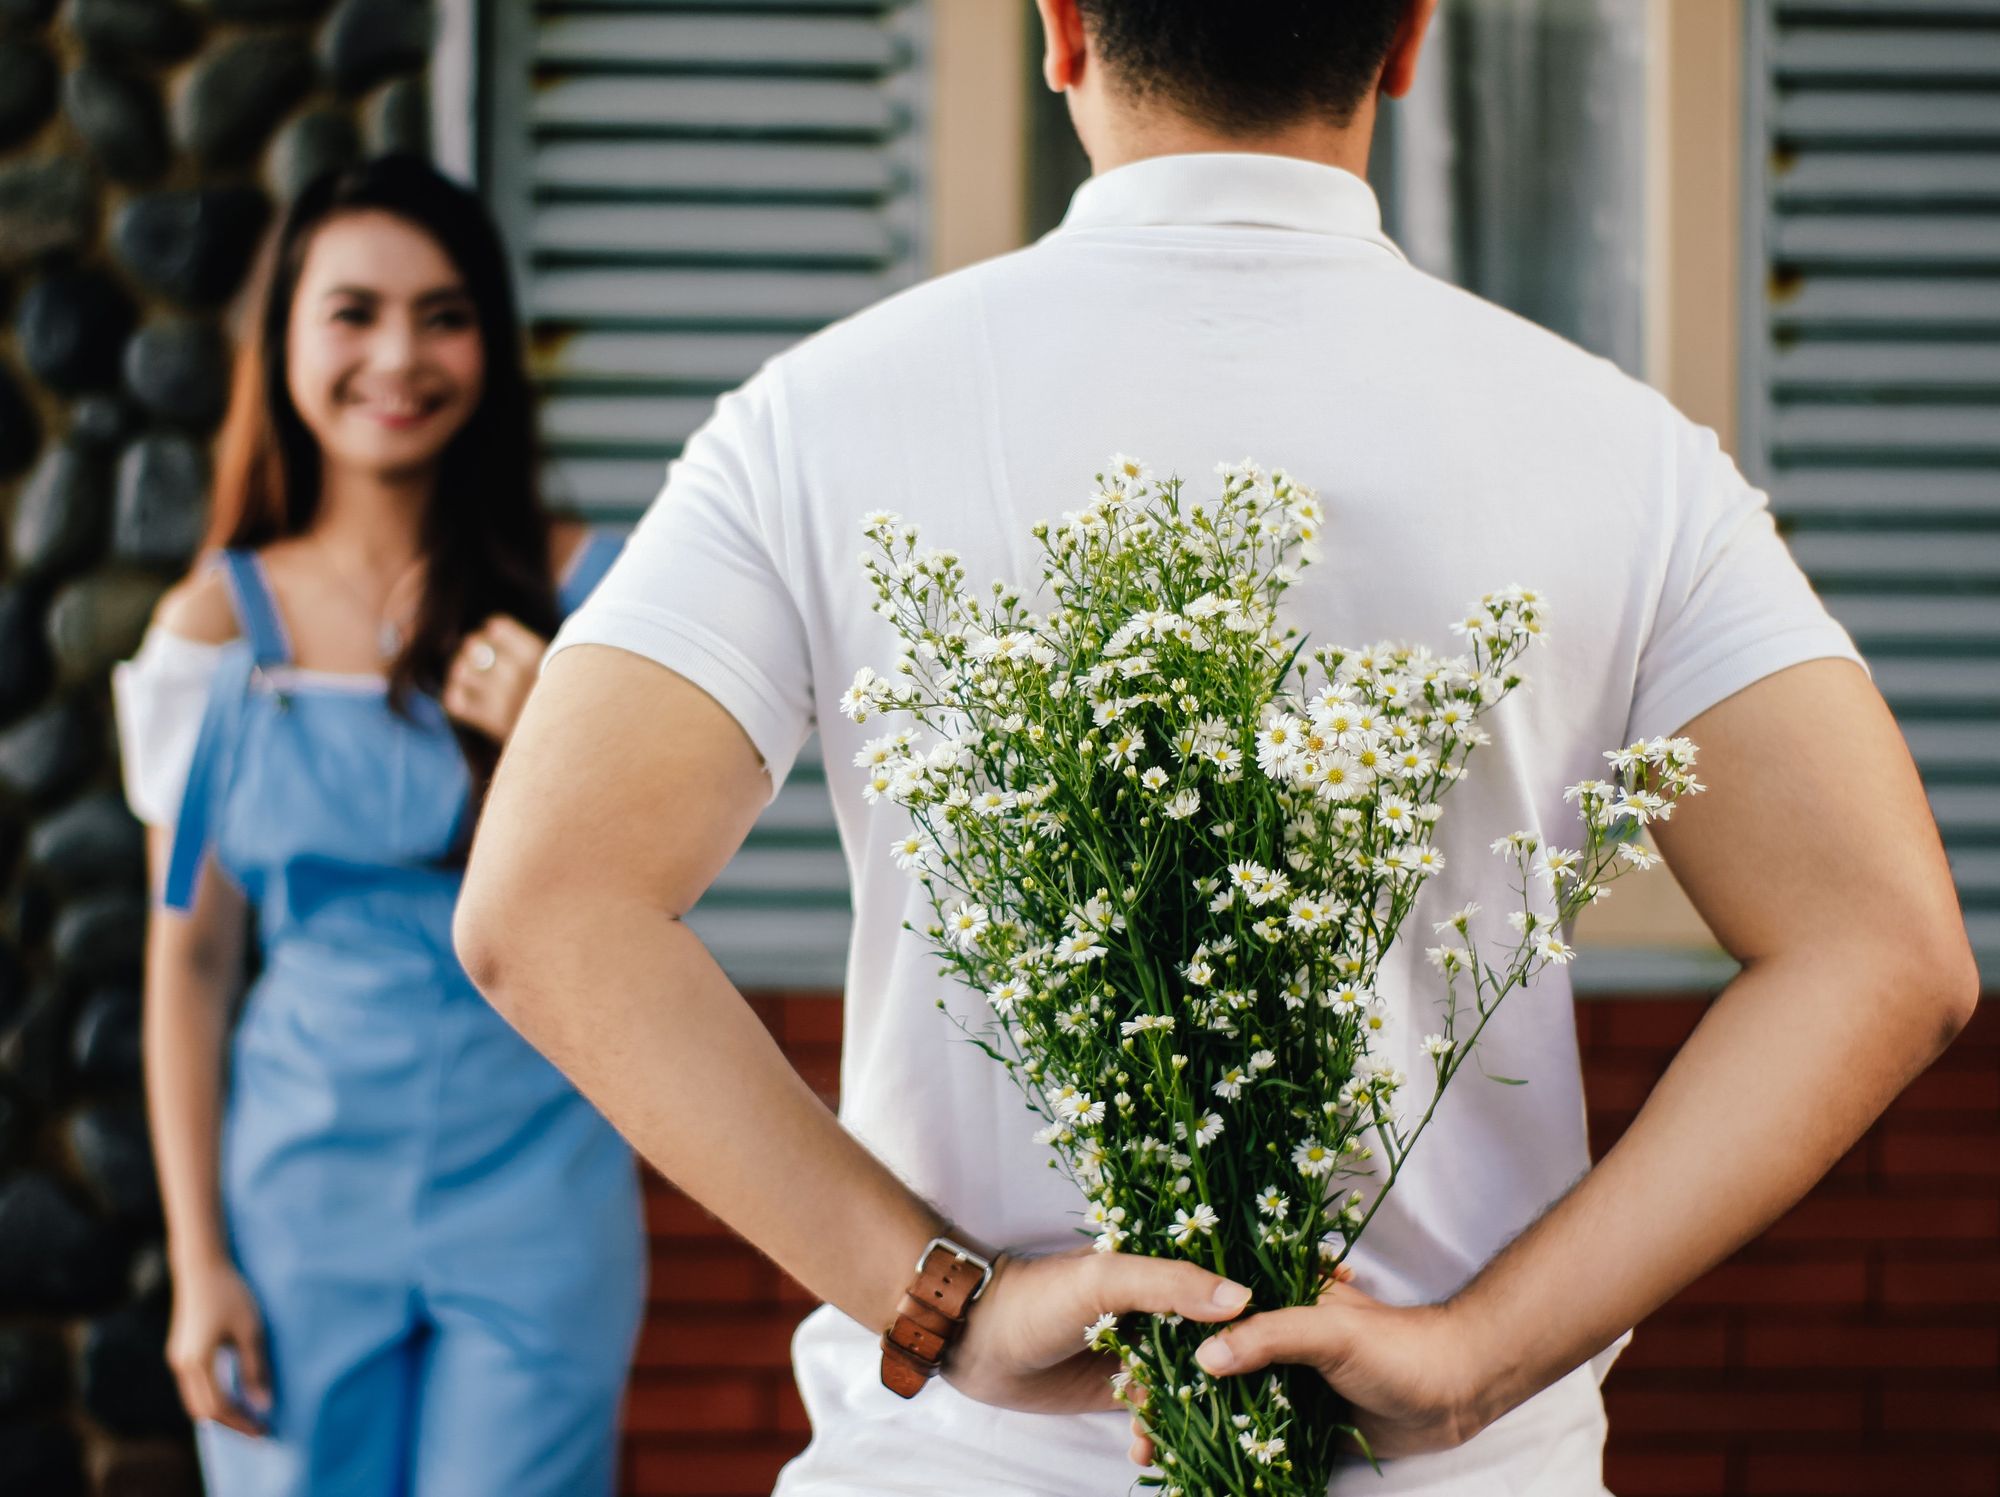 an image of a man with flowers behind his back and a woman in front of him